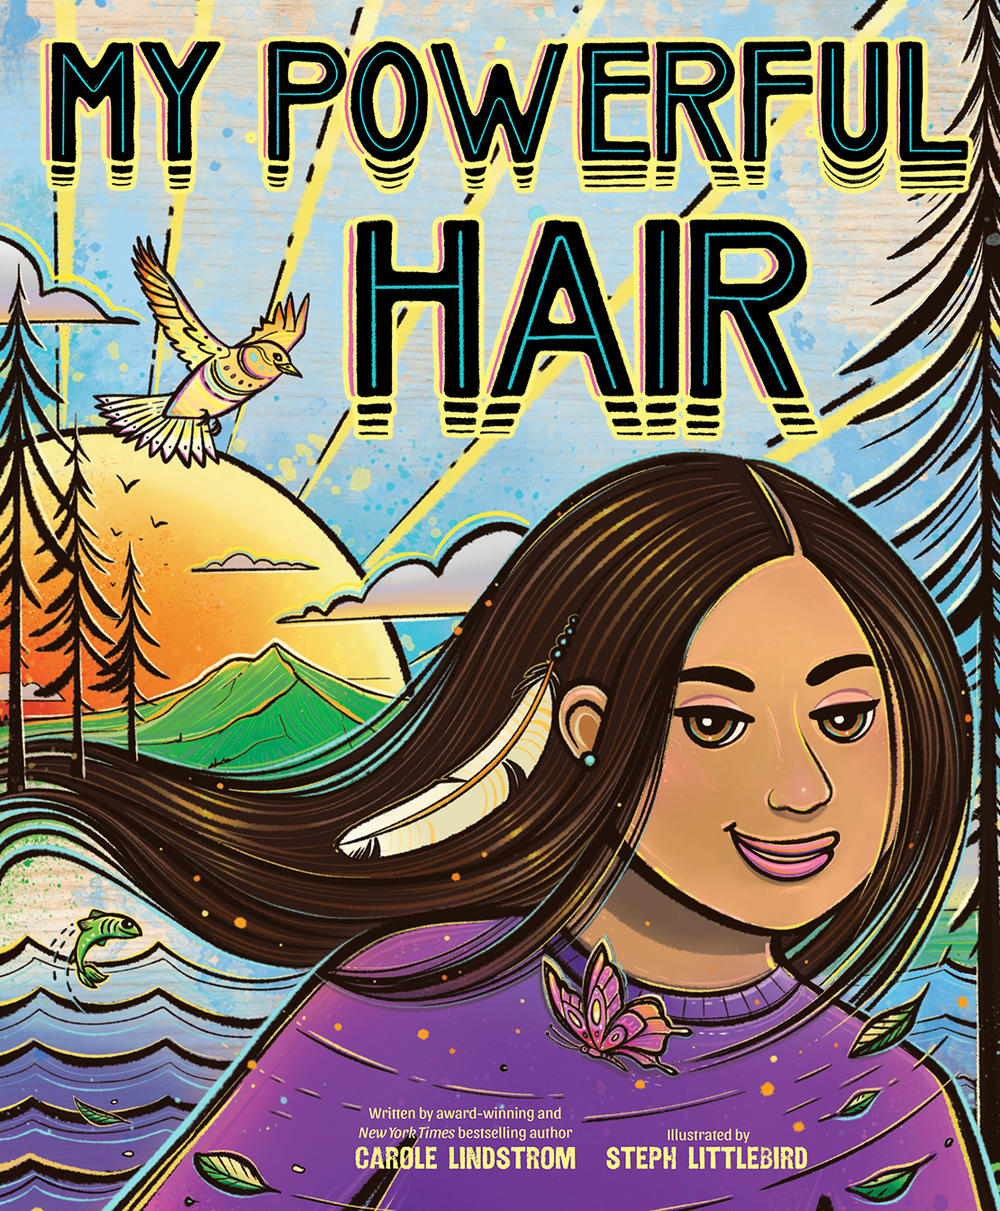 With illustrations by Steph Littlebird, author Carole Lindstrom's new children's book celebrates the significance of hair for Native Americans.